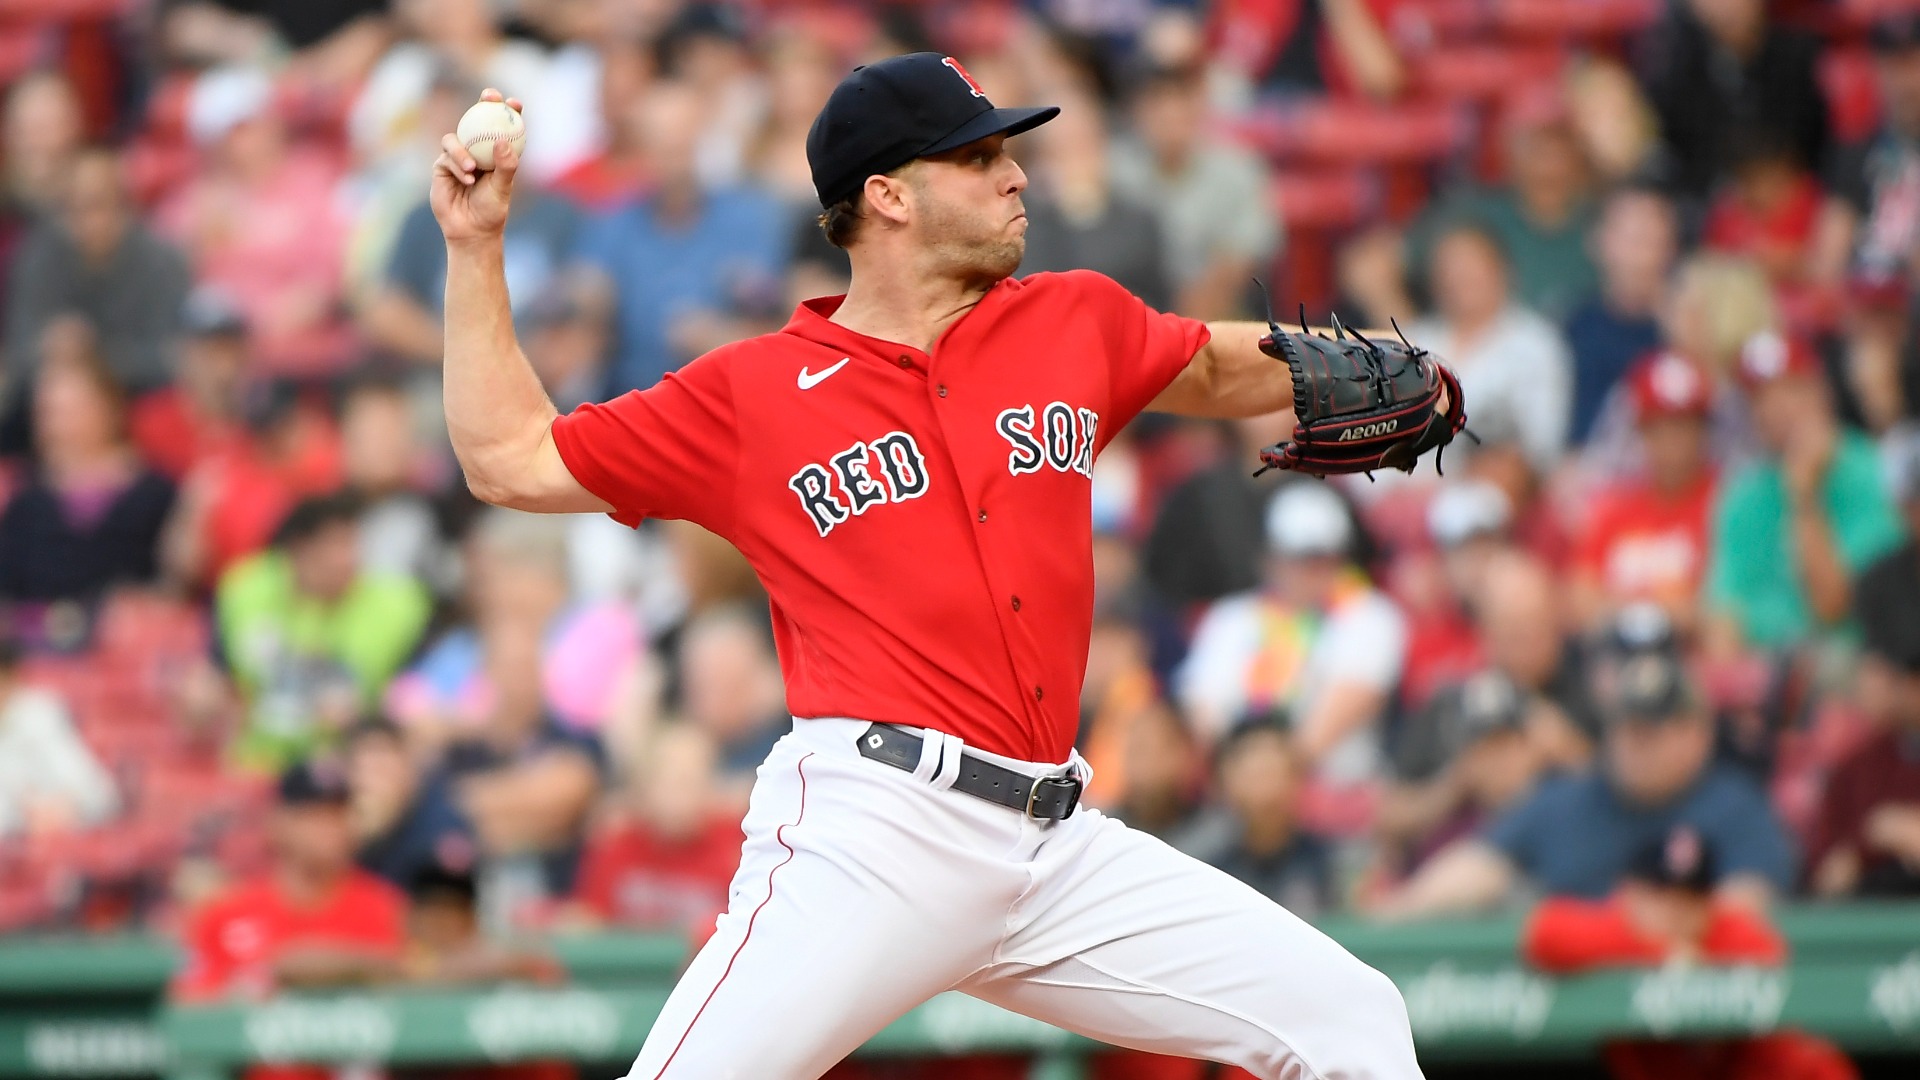 Boston Red Sox Pitcher Justin Garza delivers a pitch during a MLB